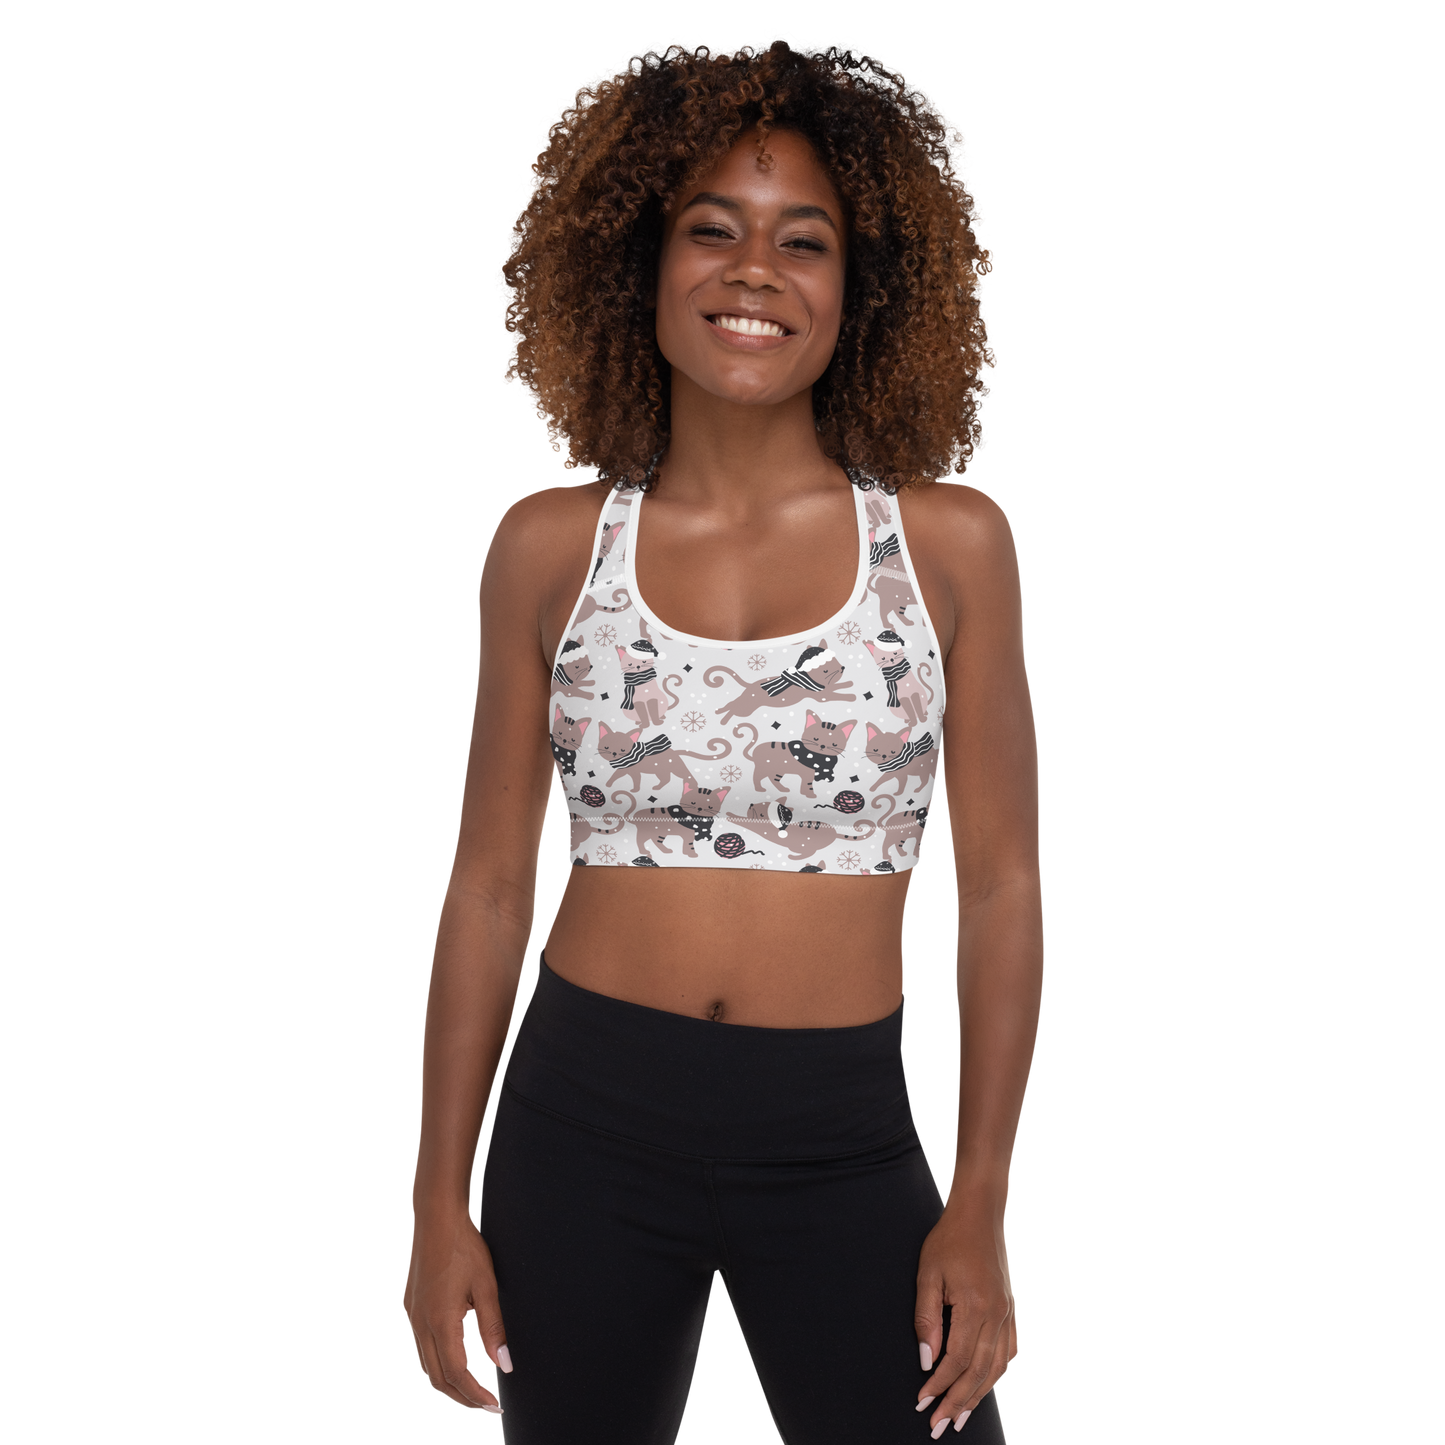 Winter Christmas Cat | Seamless Patterns | All-Over Print Padded Sports Bra - #1